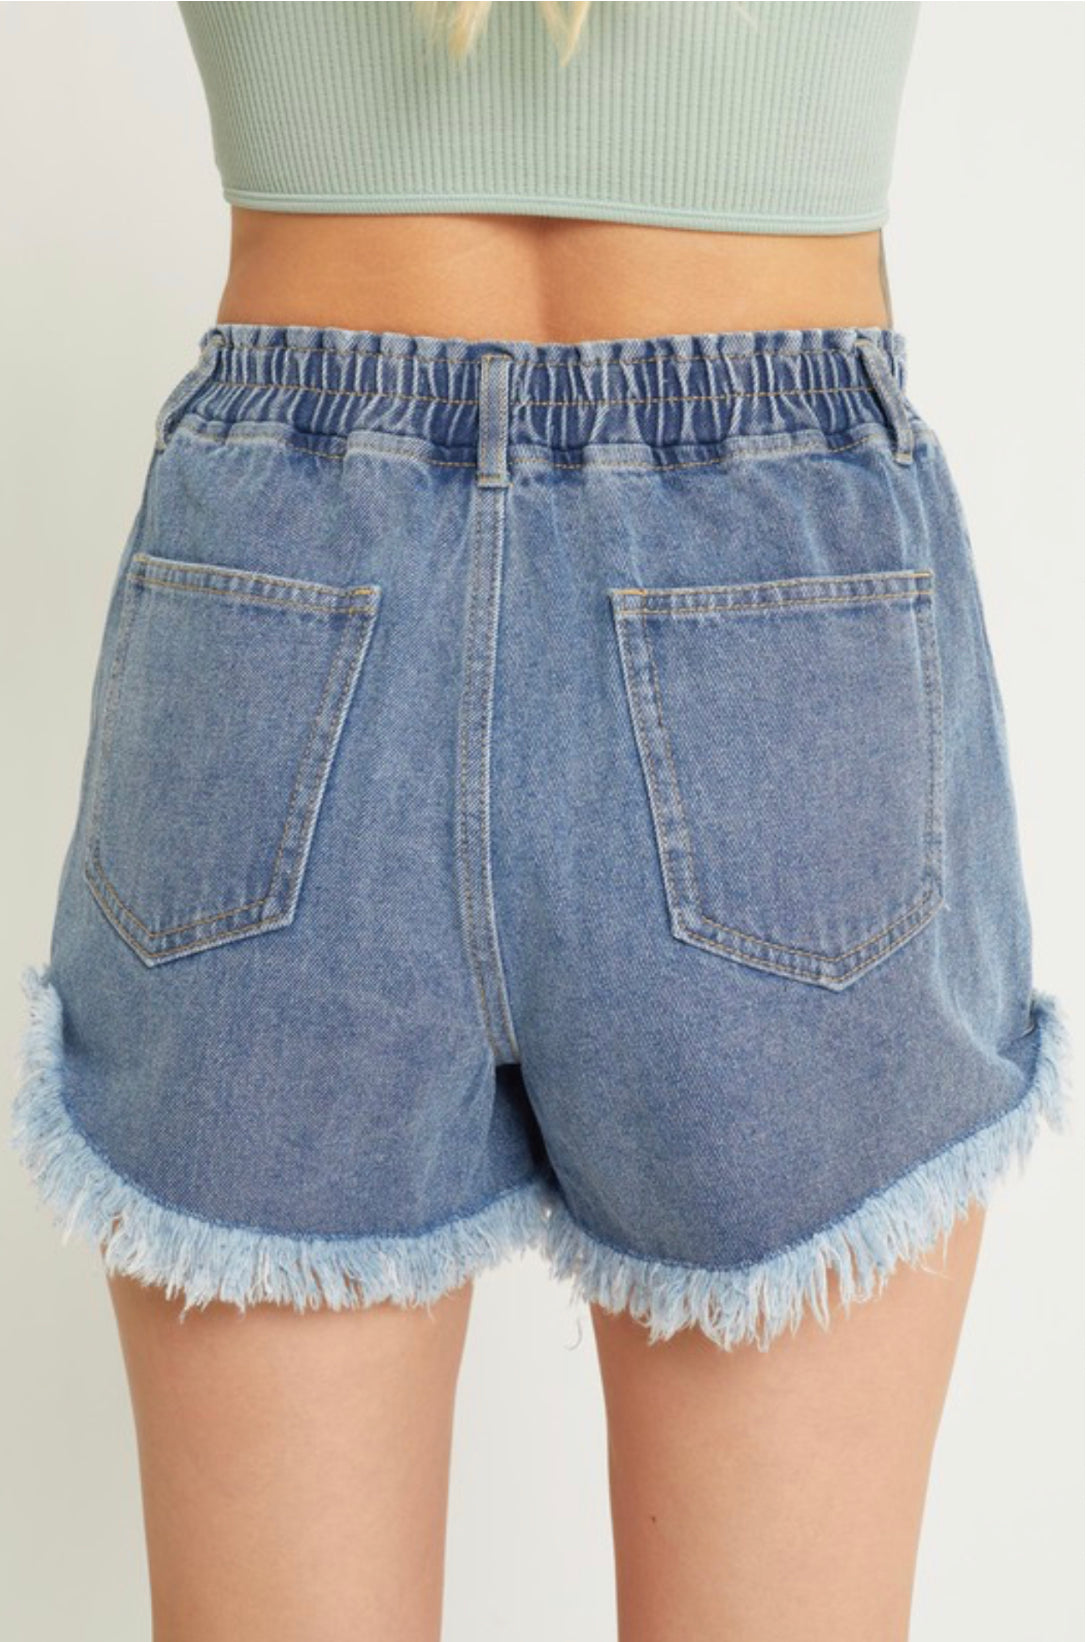 Denim Shorts - Style by me